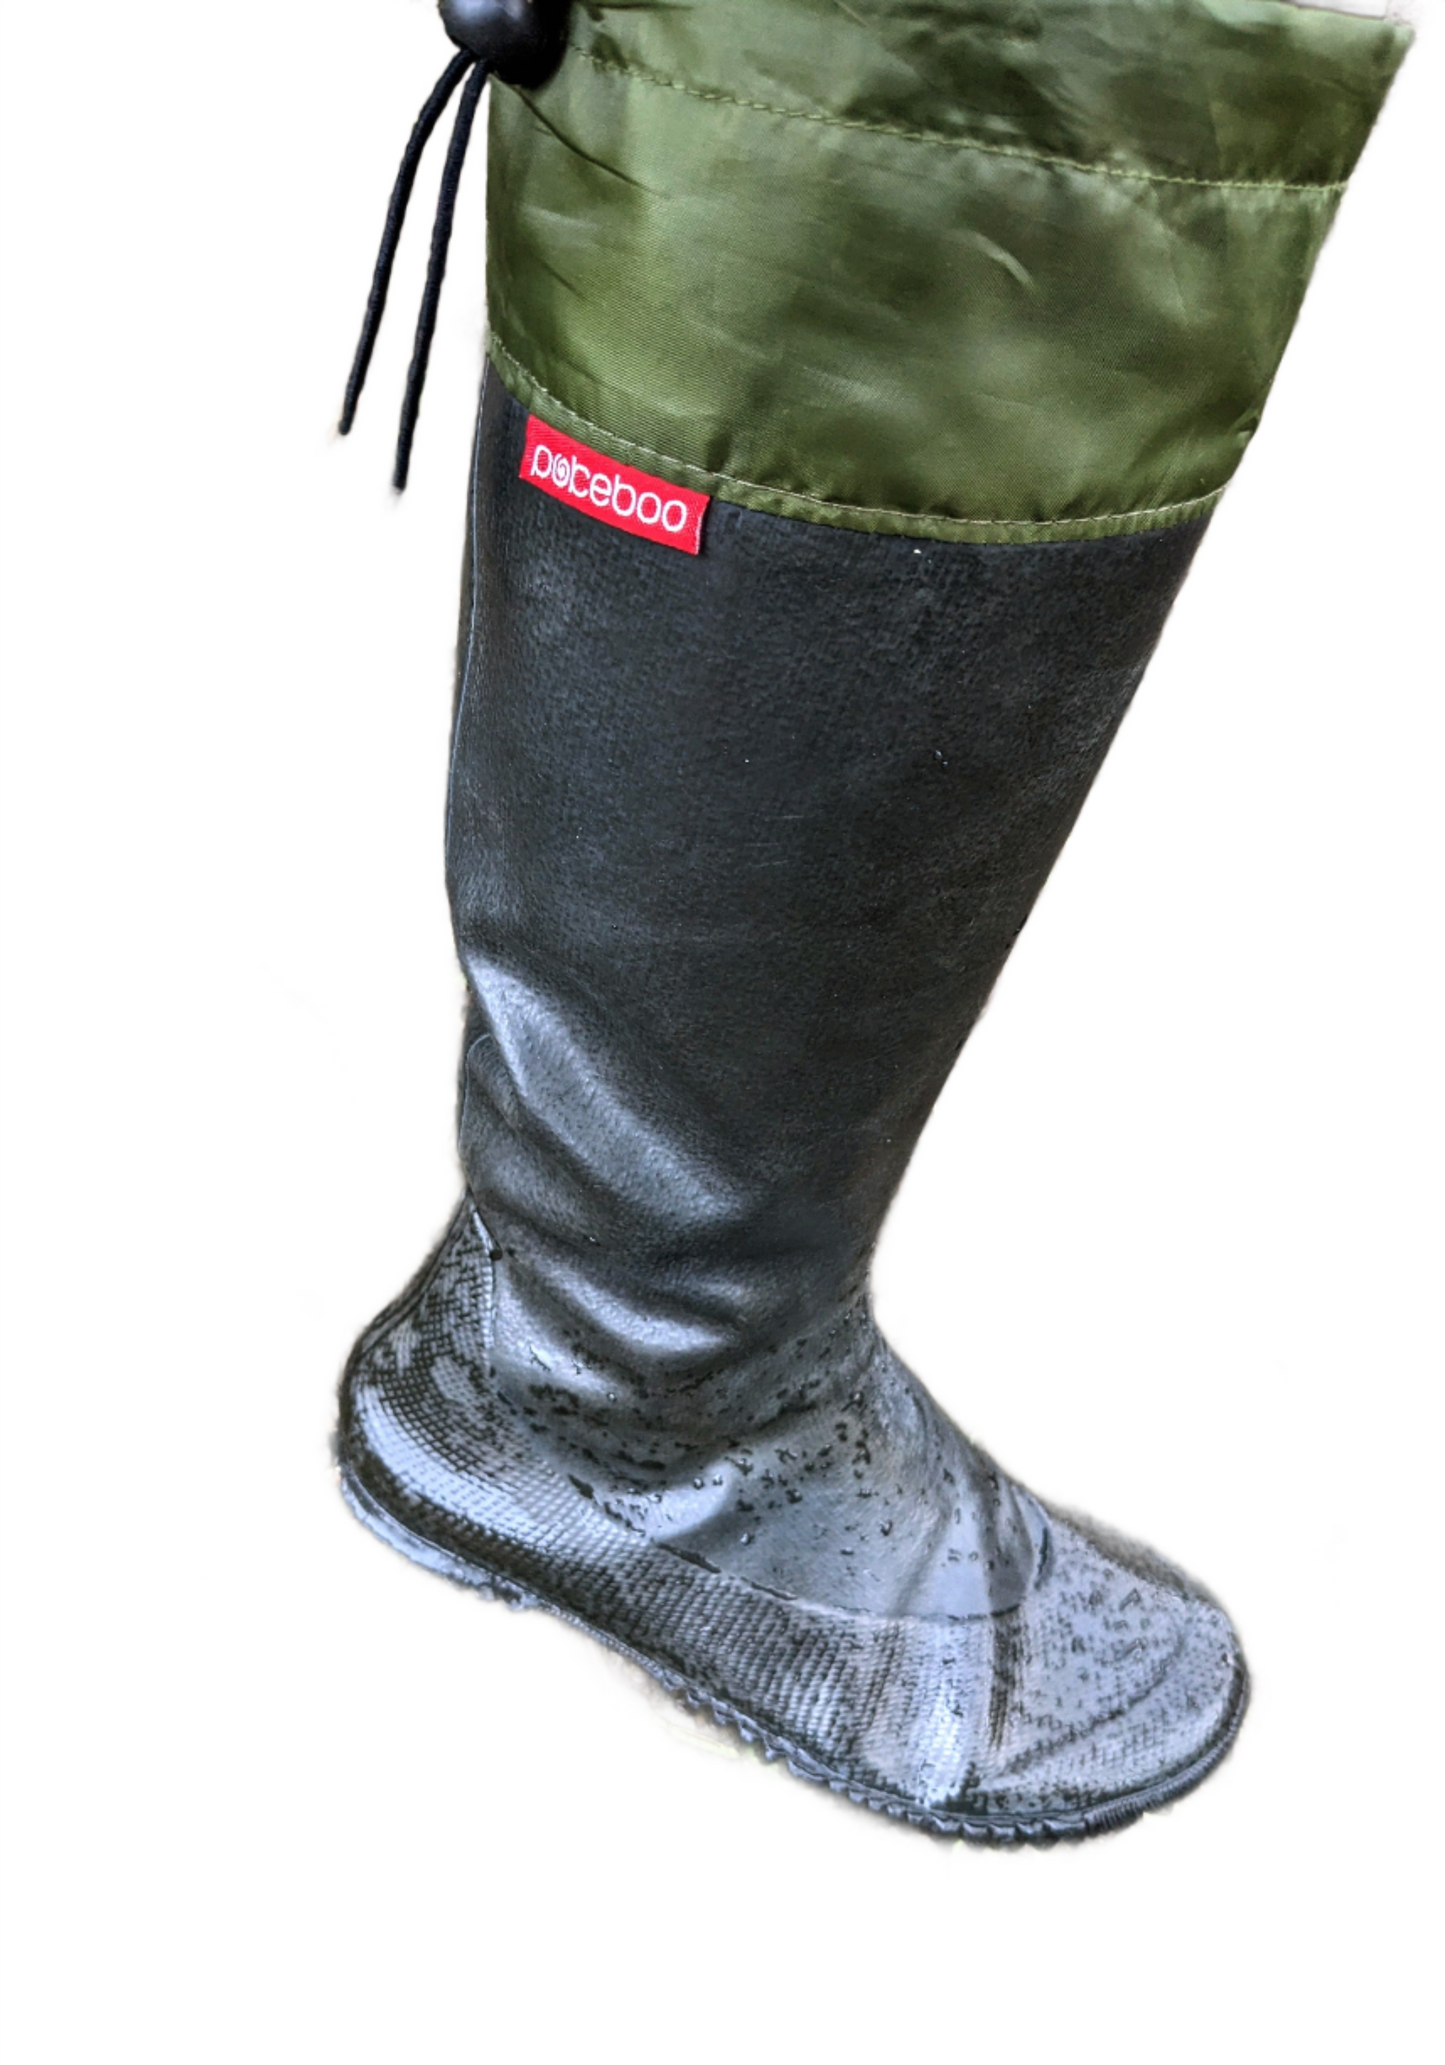 New Pokeboo TREAD Packable Boots